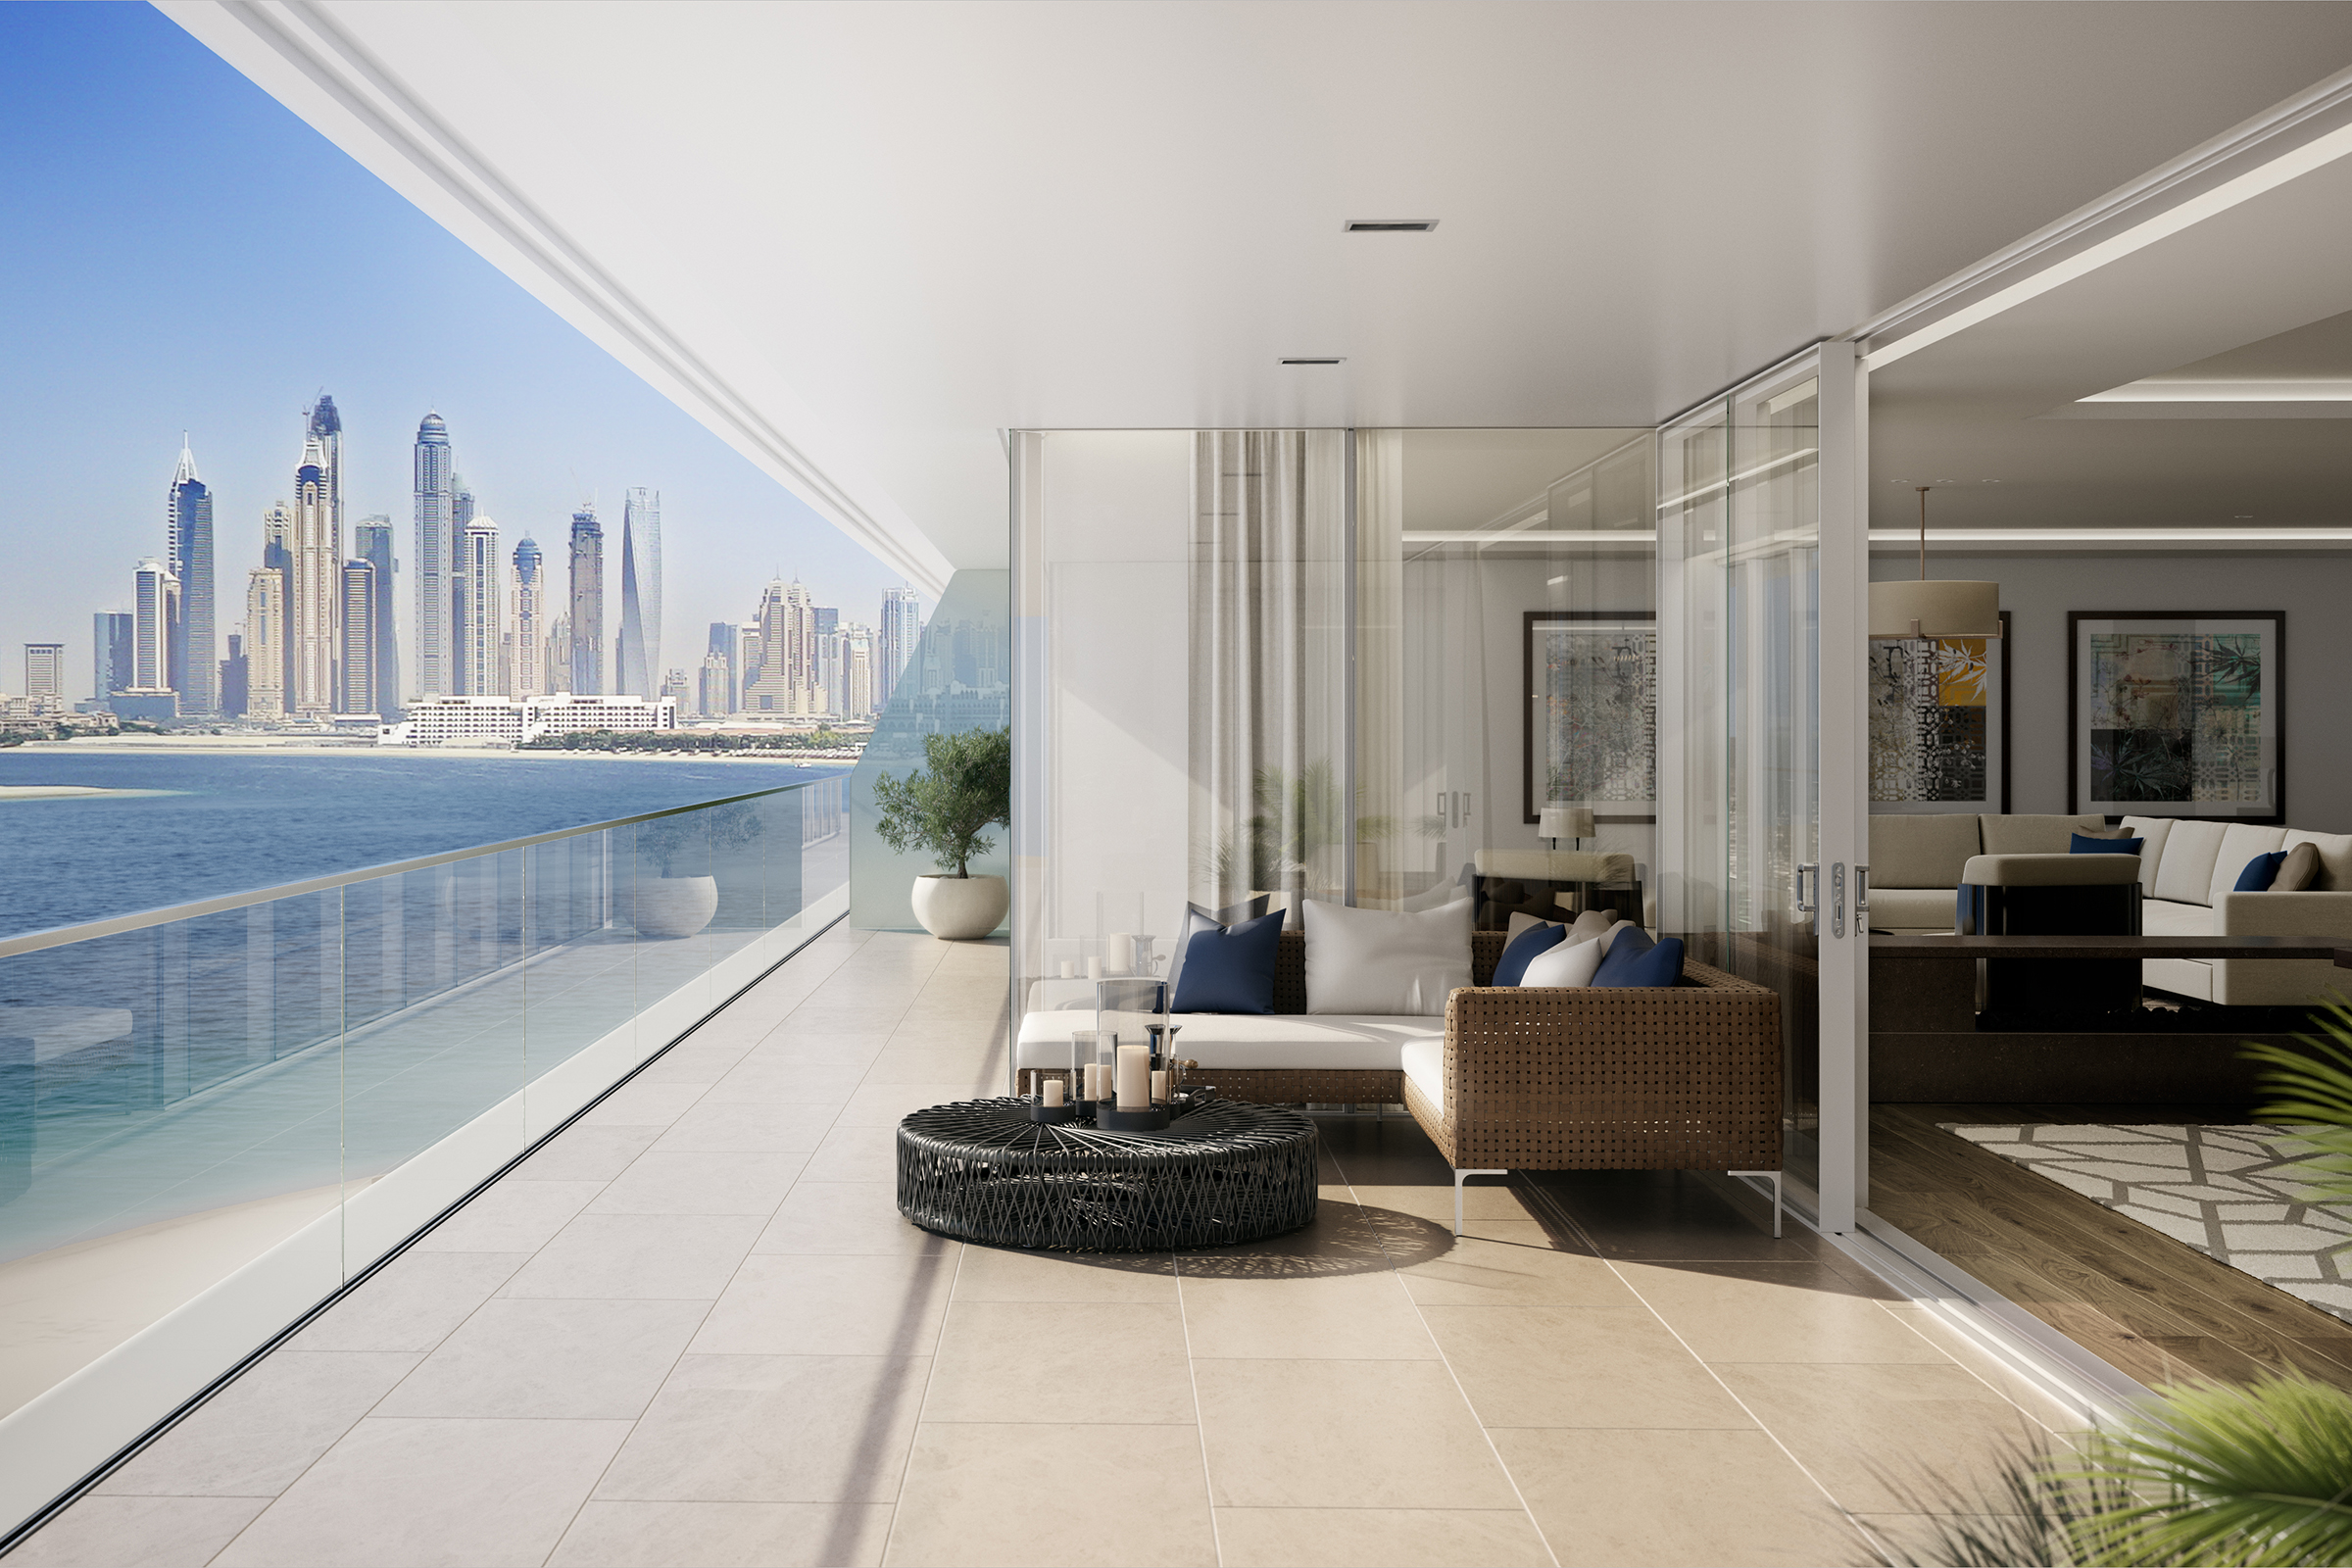 Off Plan Luxury Studios, 1, 2, 3 Bedroom Apartments, Suites And Penthouses At Balqis Residence Er S 5480